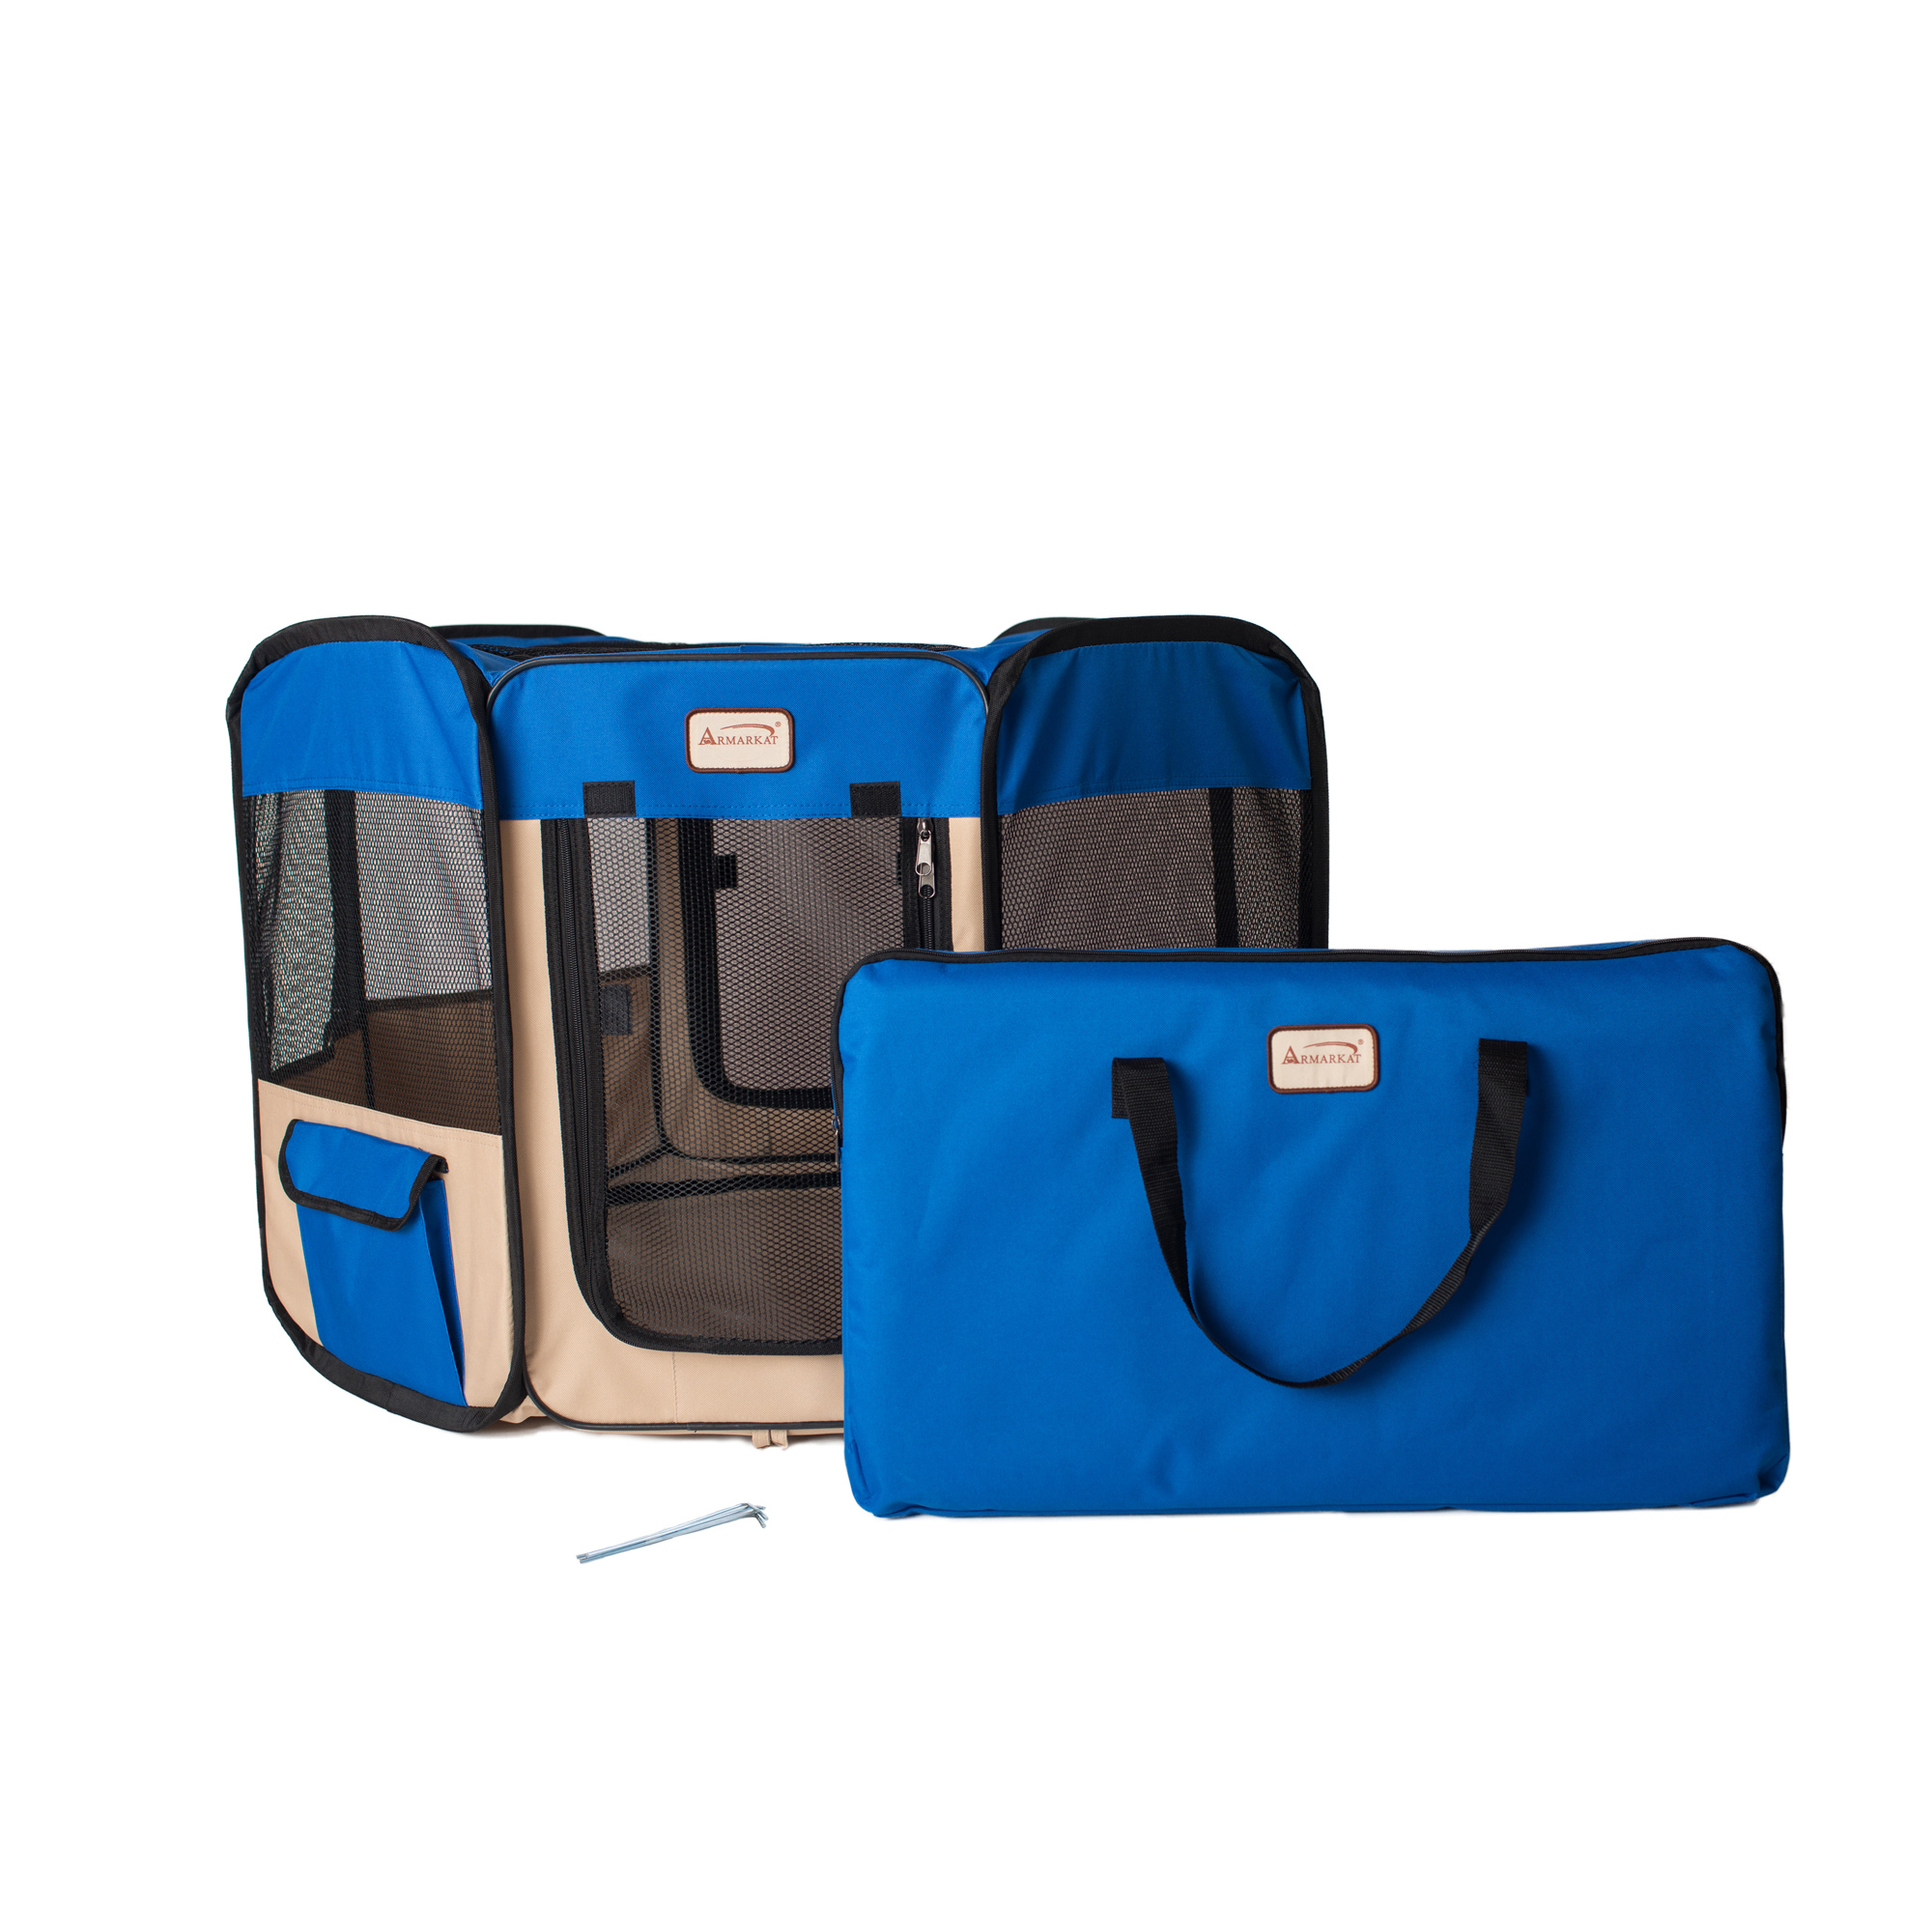 Armarkat Portable Playpen, Blue and Beige, PP001B - image 1 of 2